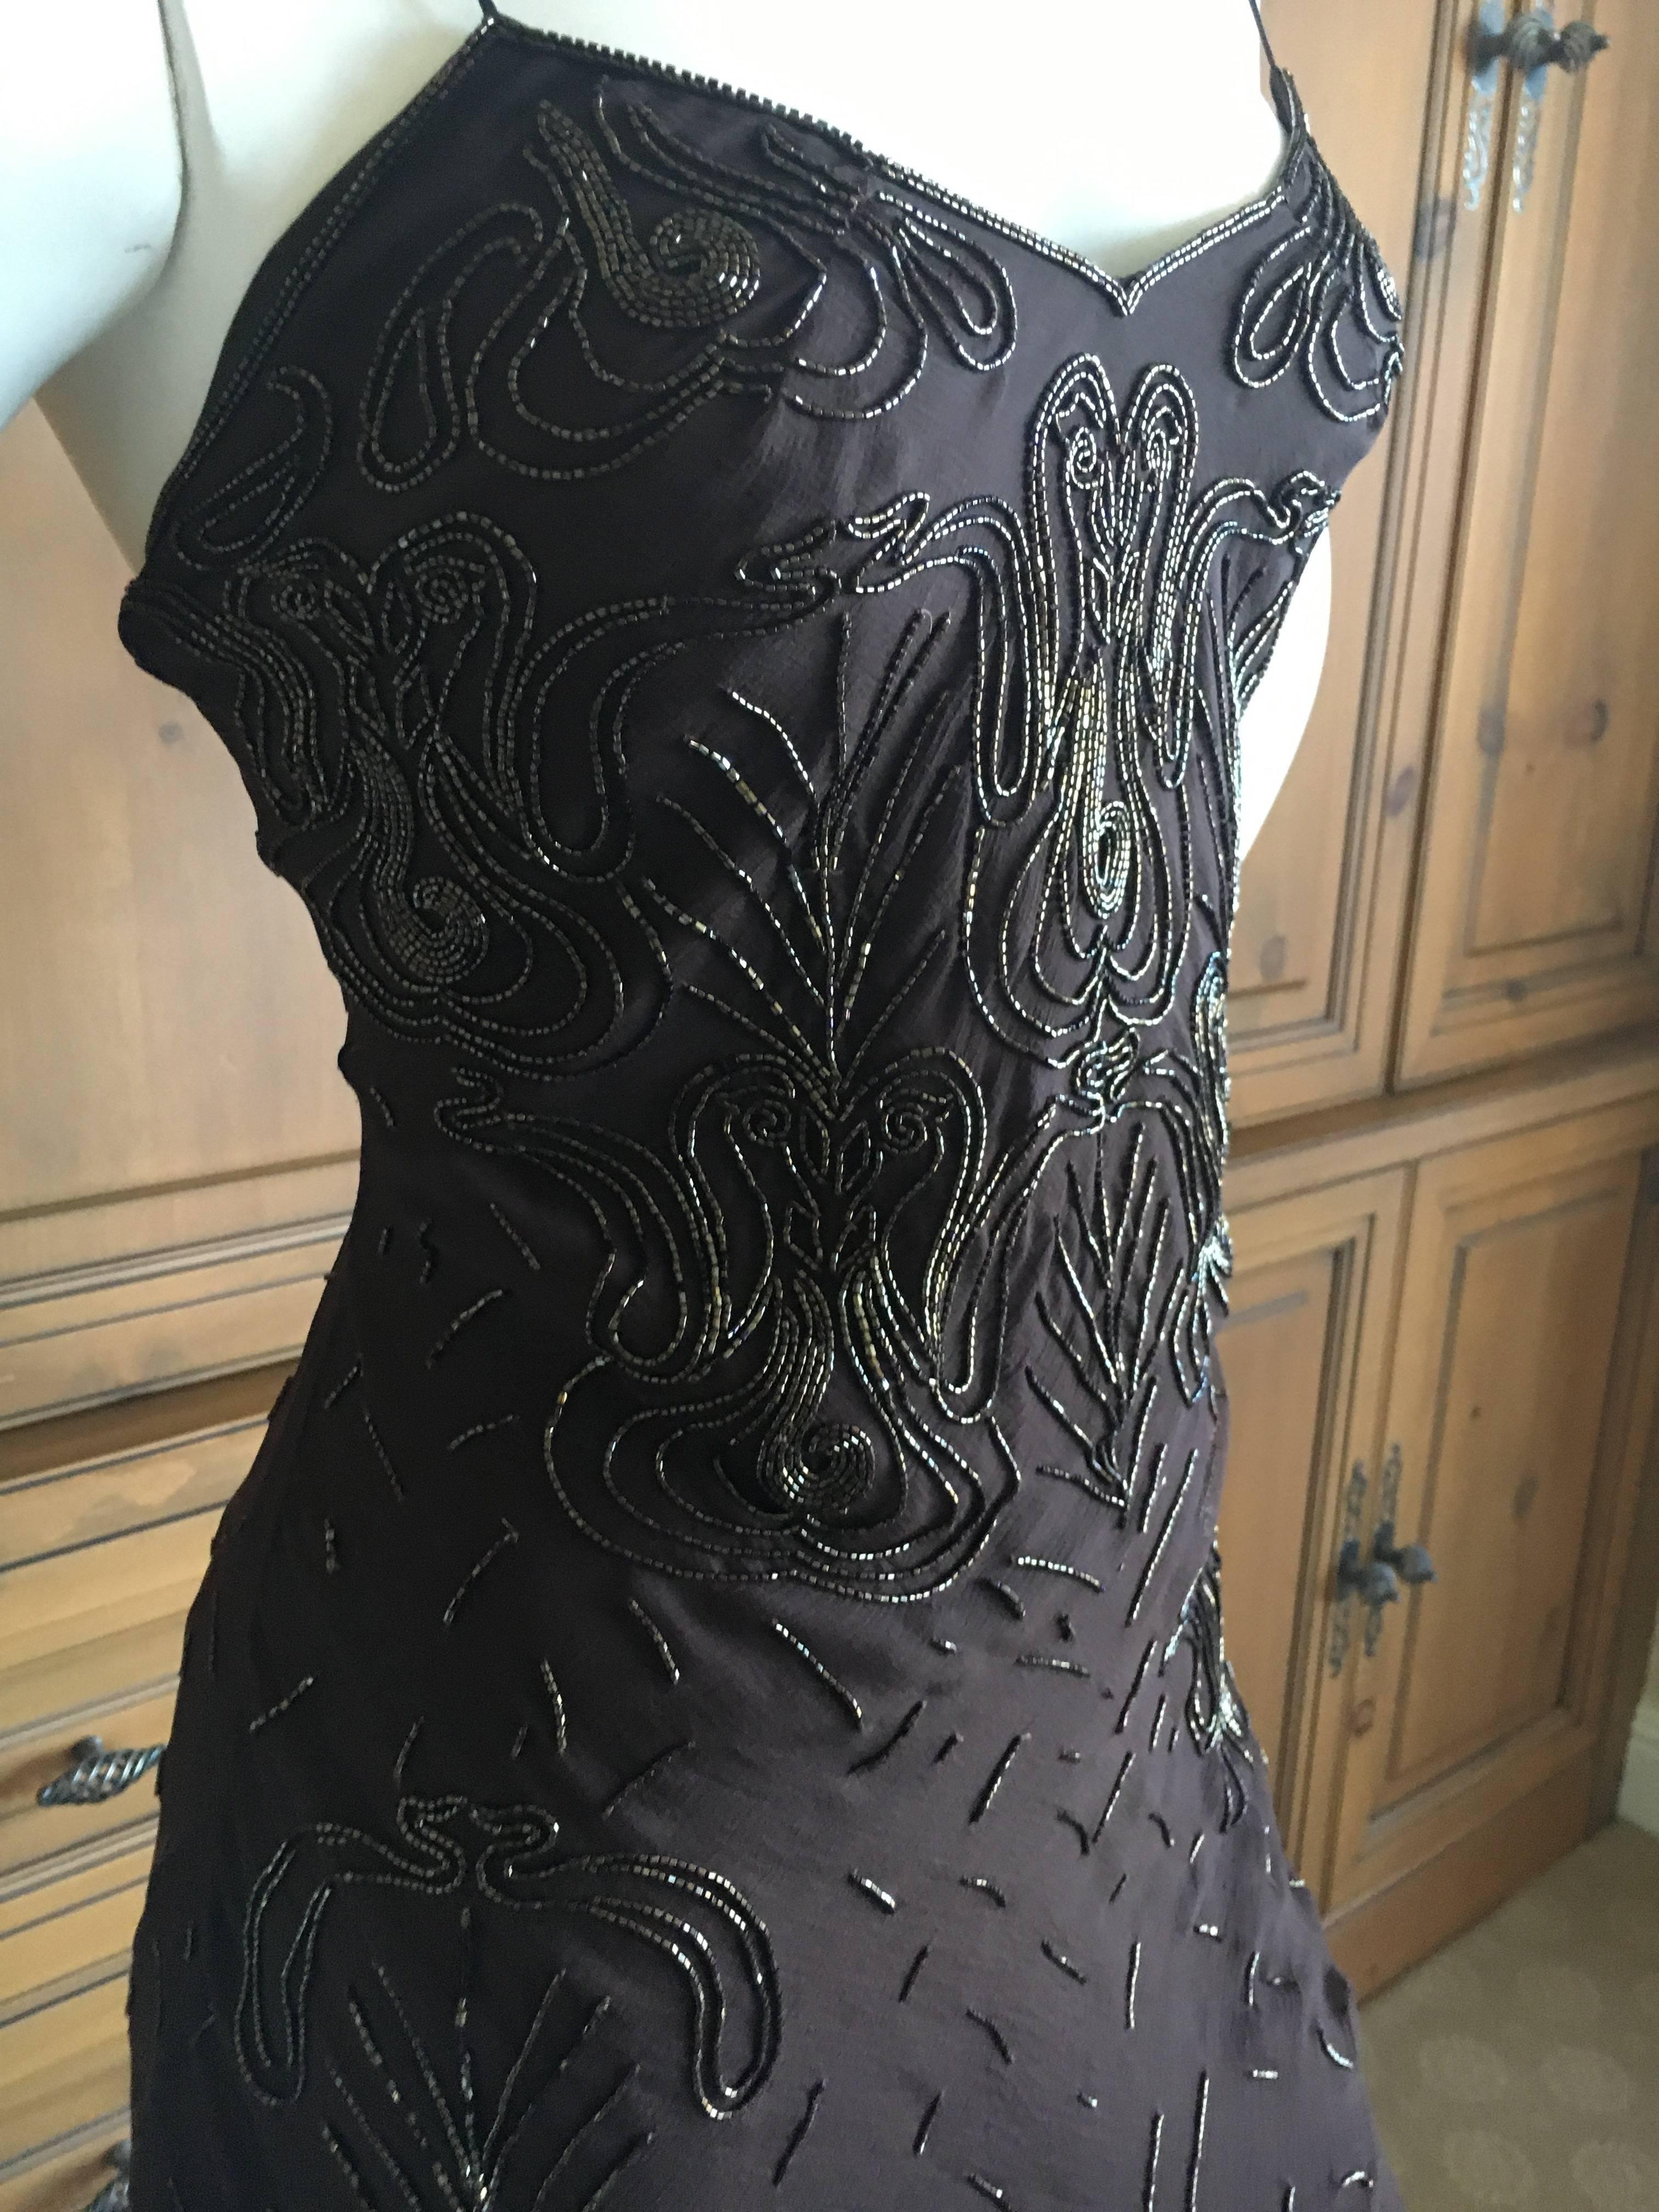 Christian Dior Bead Embellished Silk Chiffon Cocktail Dress by John Galliano  For Sale 2